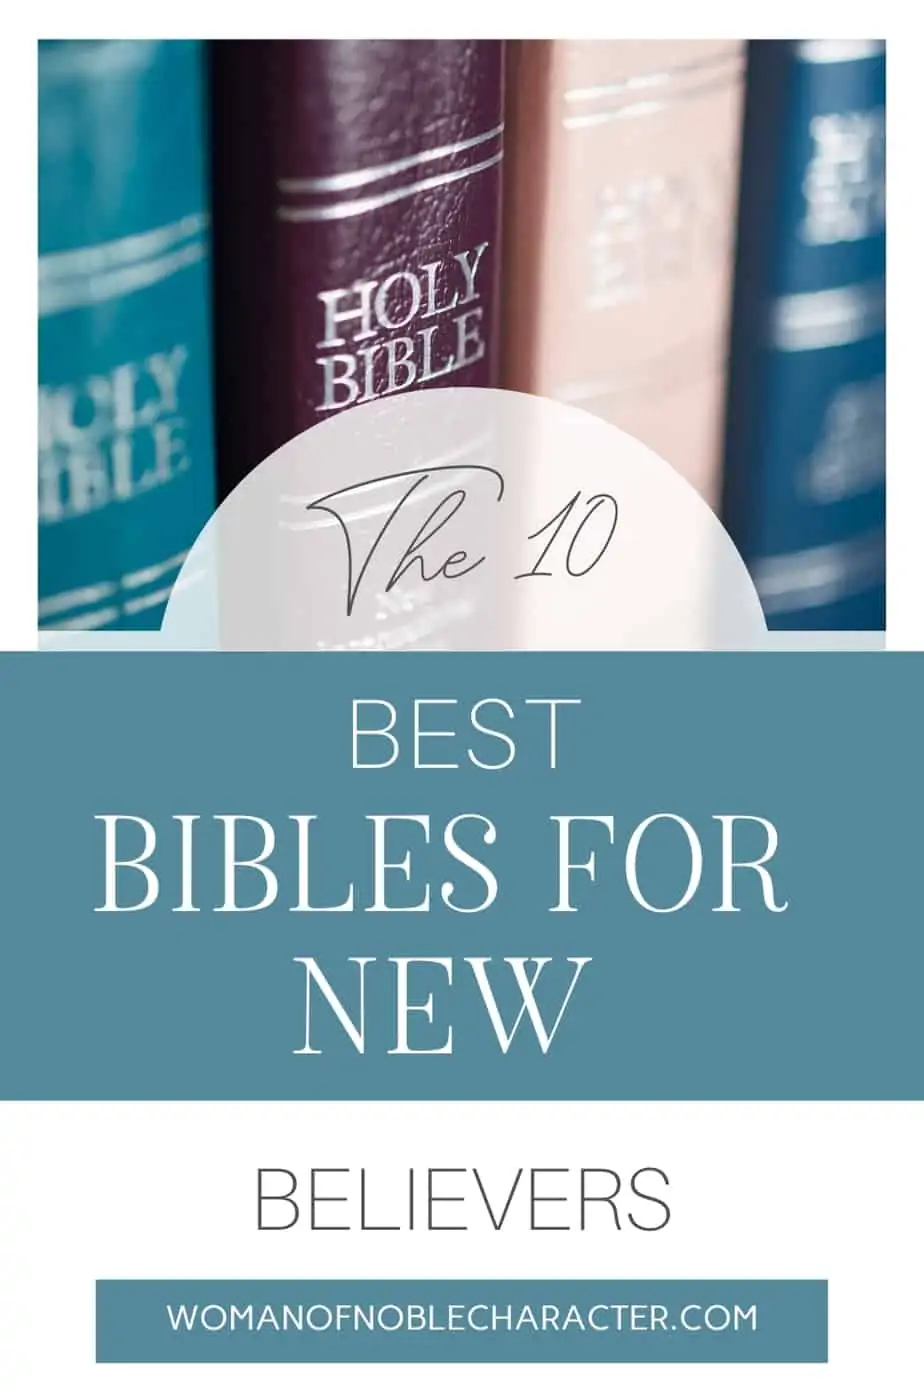 image of Bibles on a shelf with text overlay the 10 best Bibles for new believers